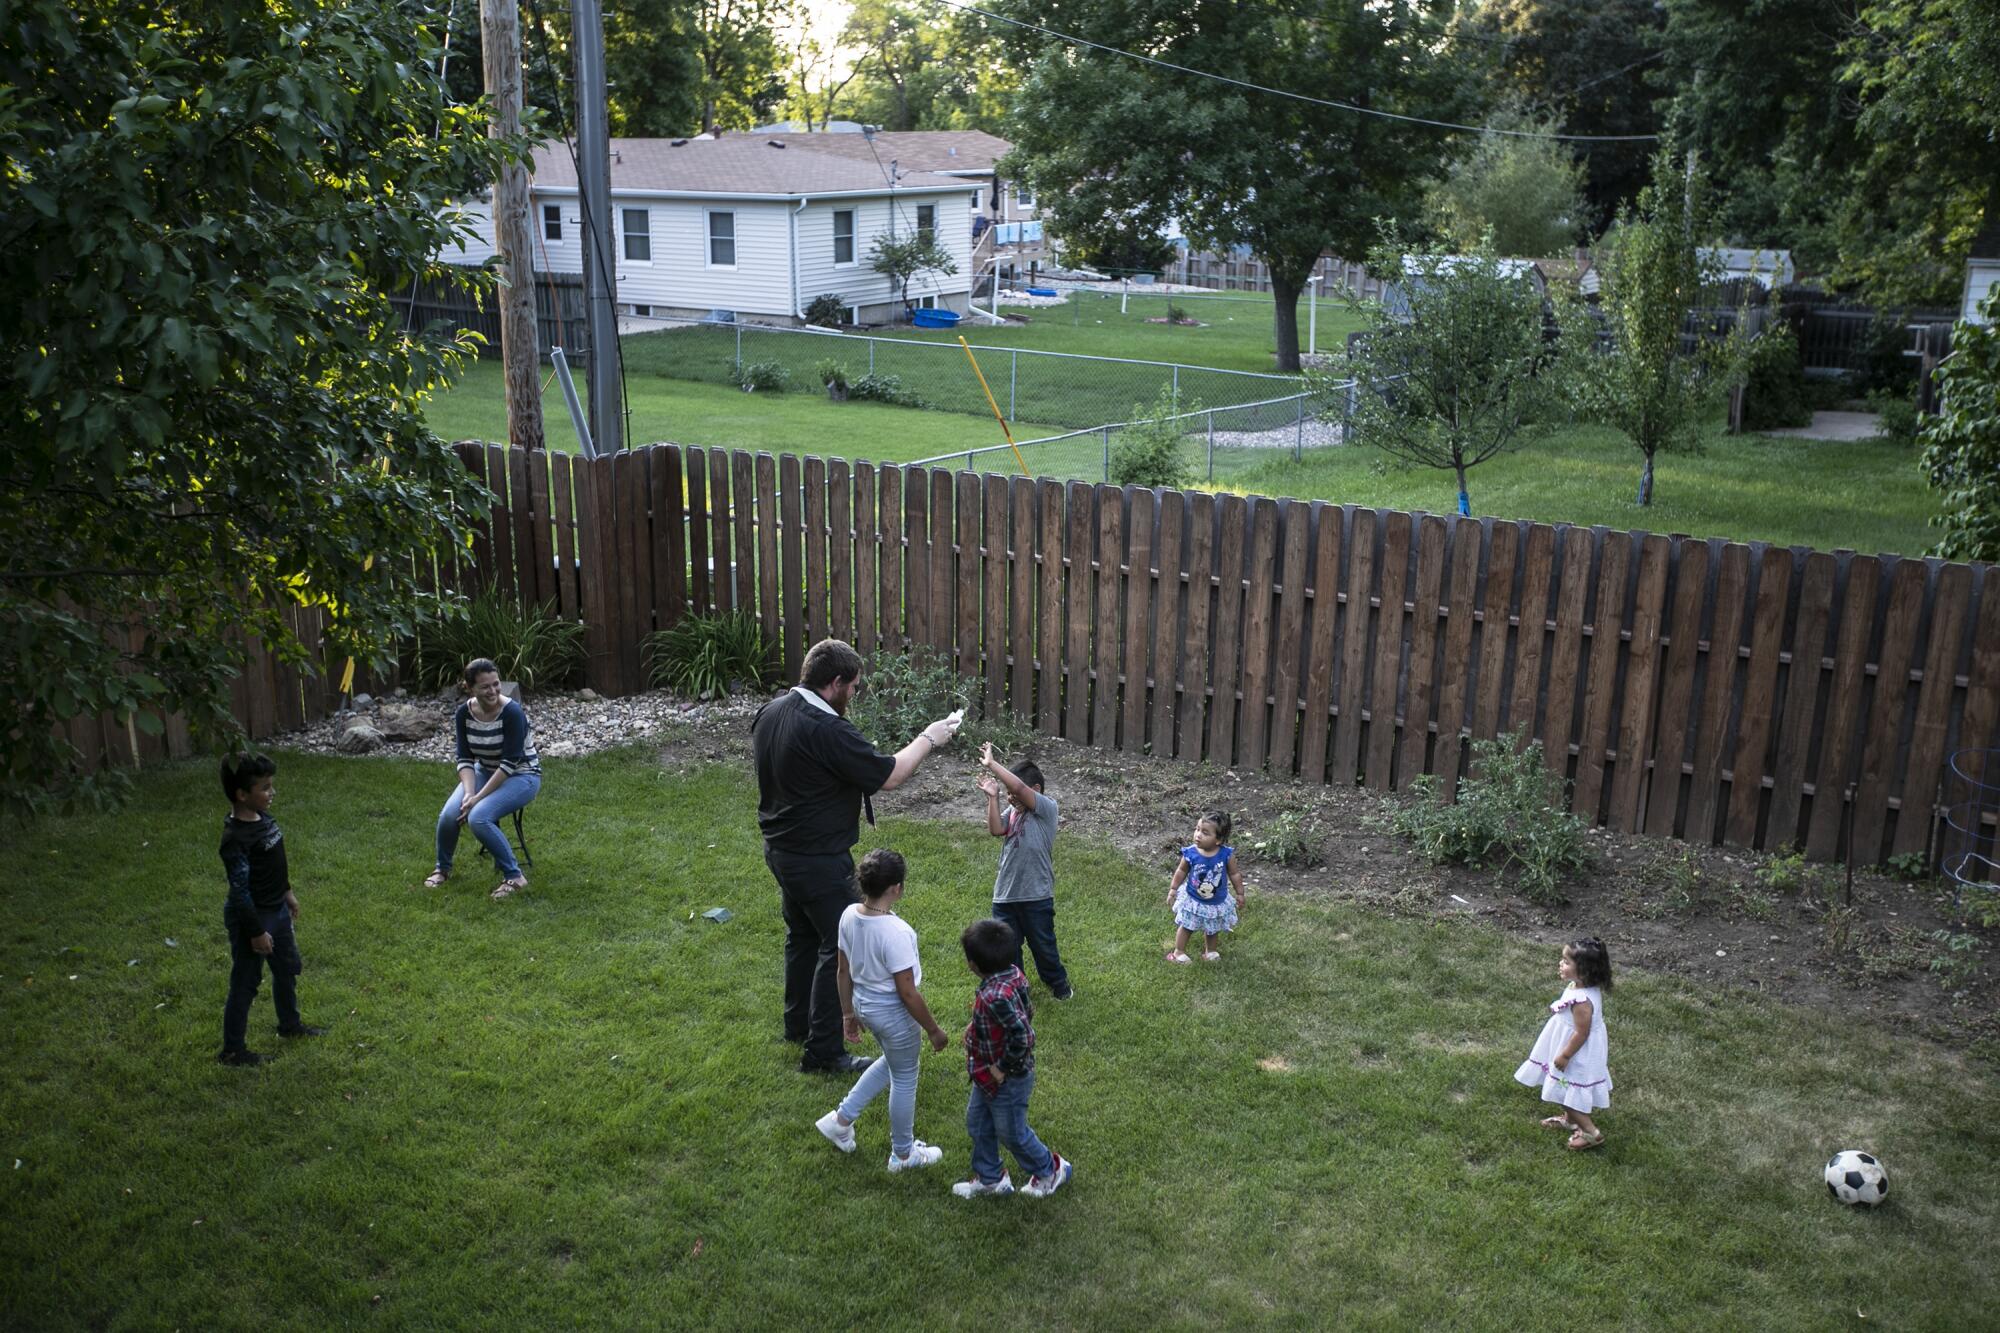 The Rev. Kristopher Cowles slings holy water while blessing the children and the backyard of the Barrera family home.